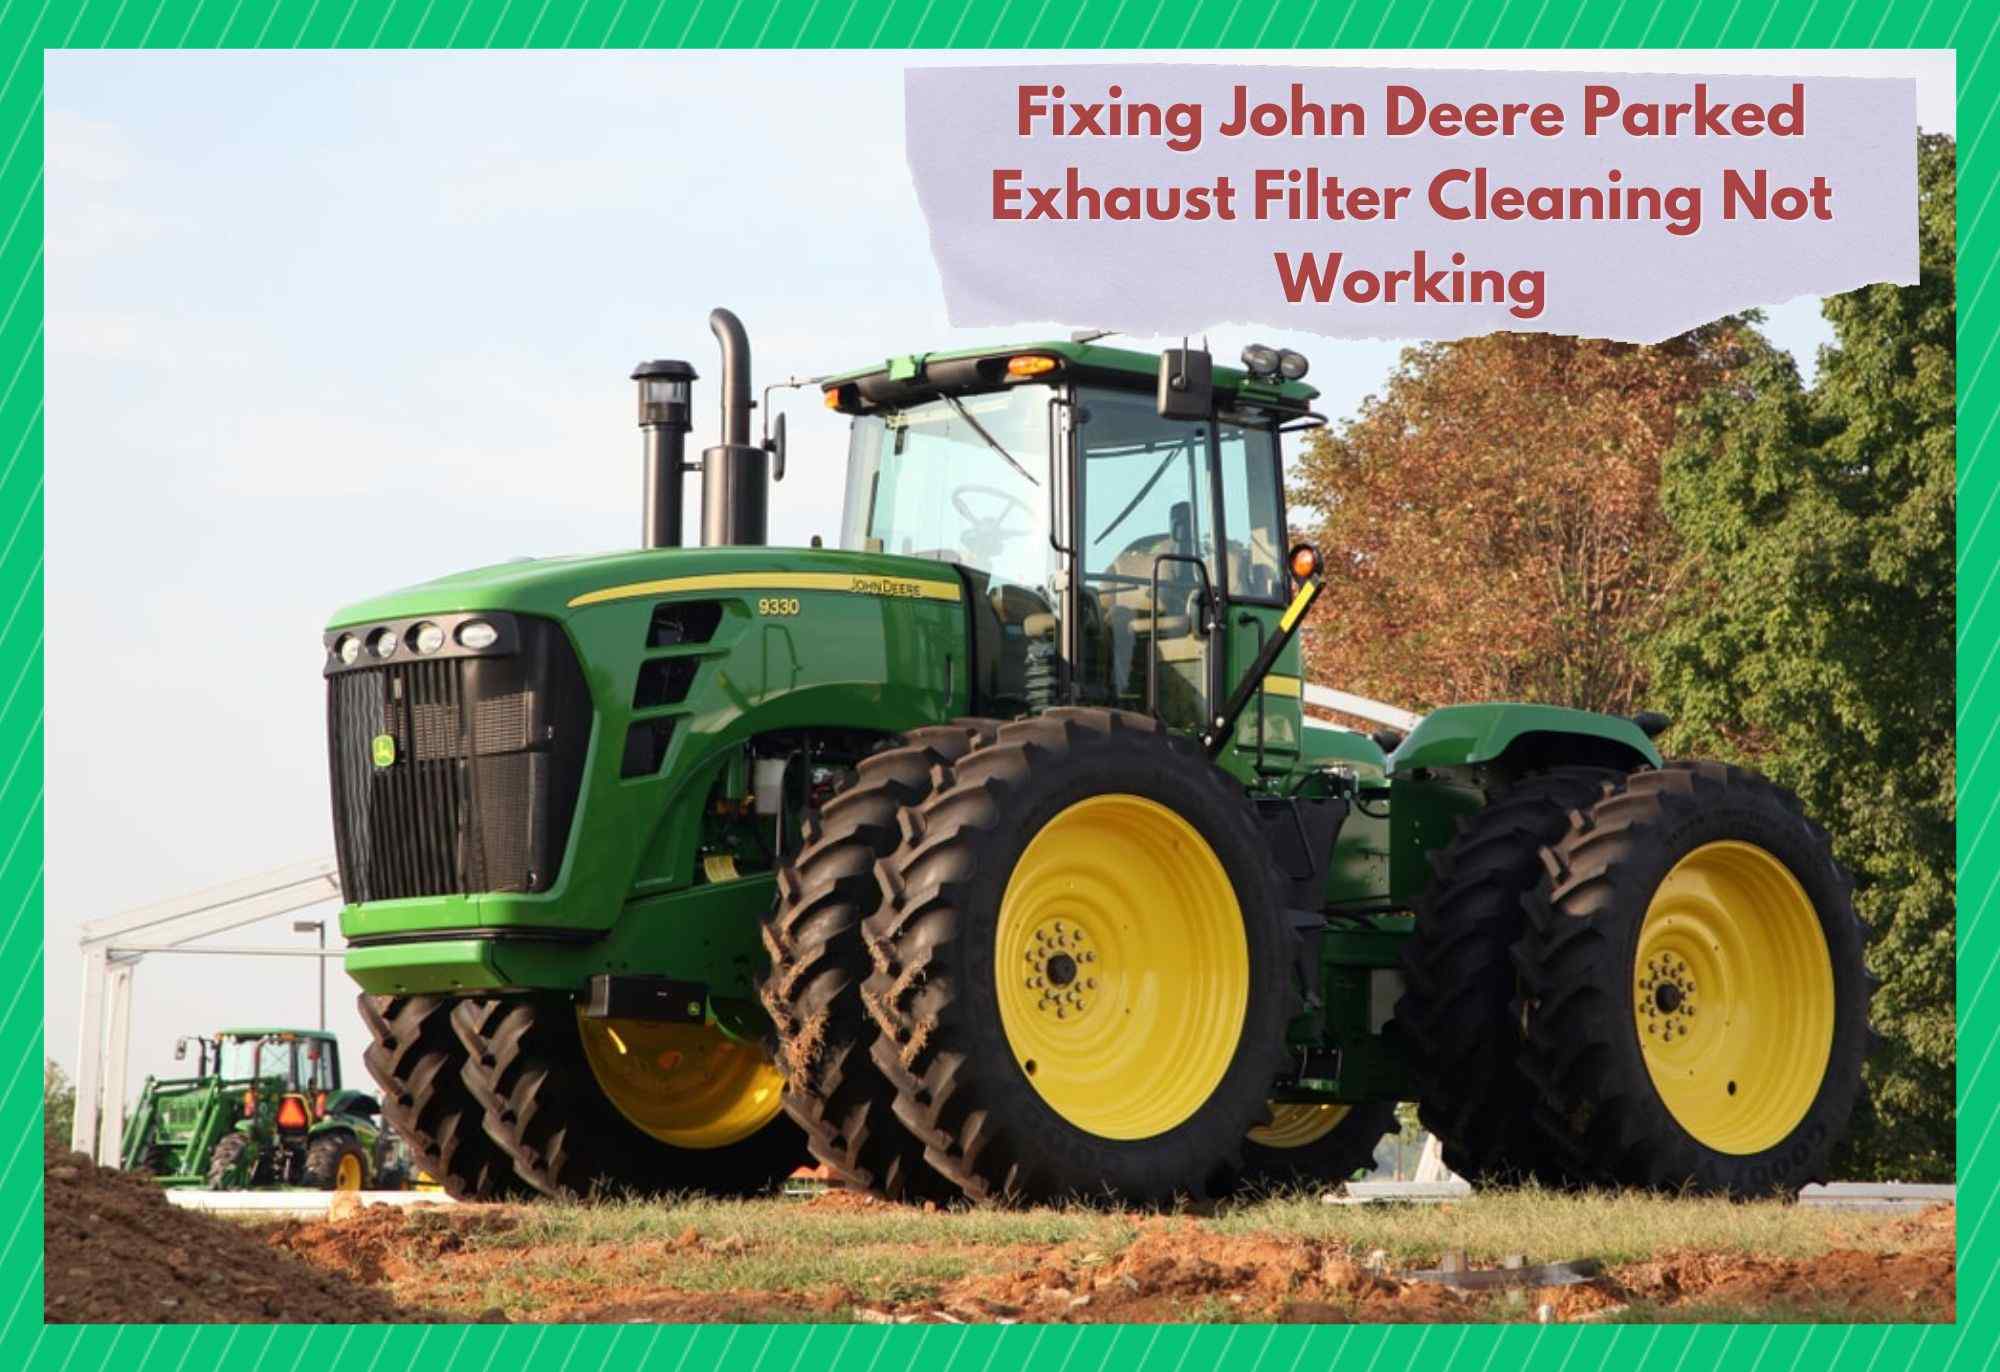 john deere parked exhaust filter cleaning not working